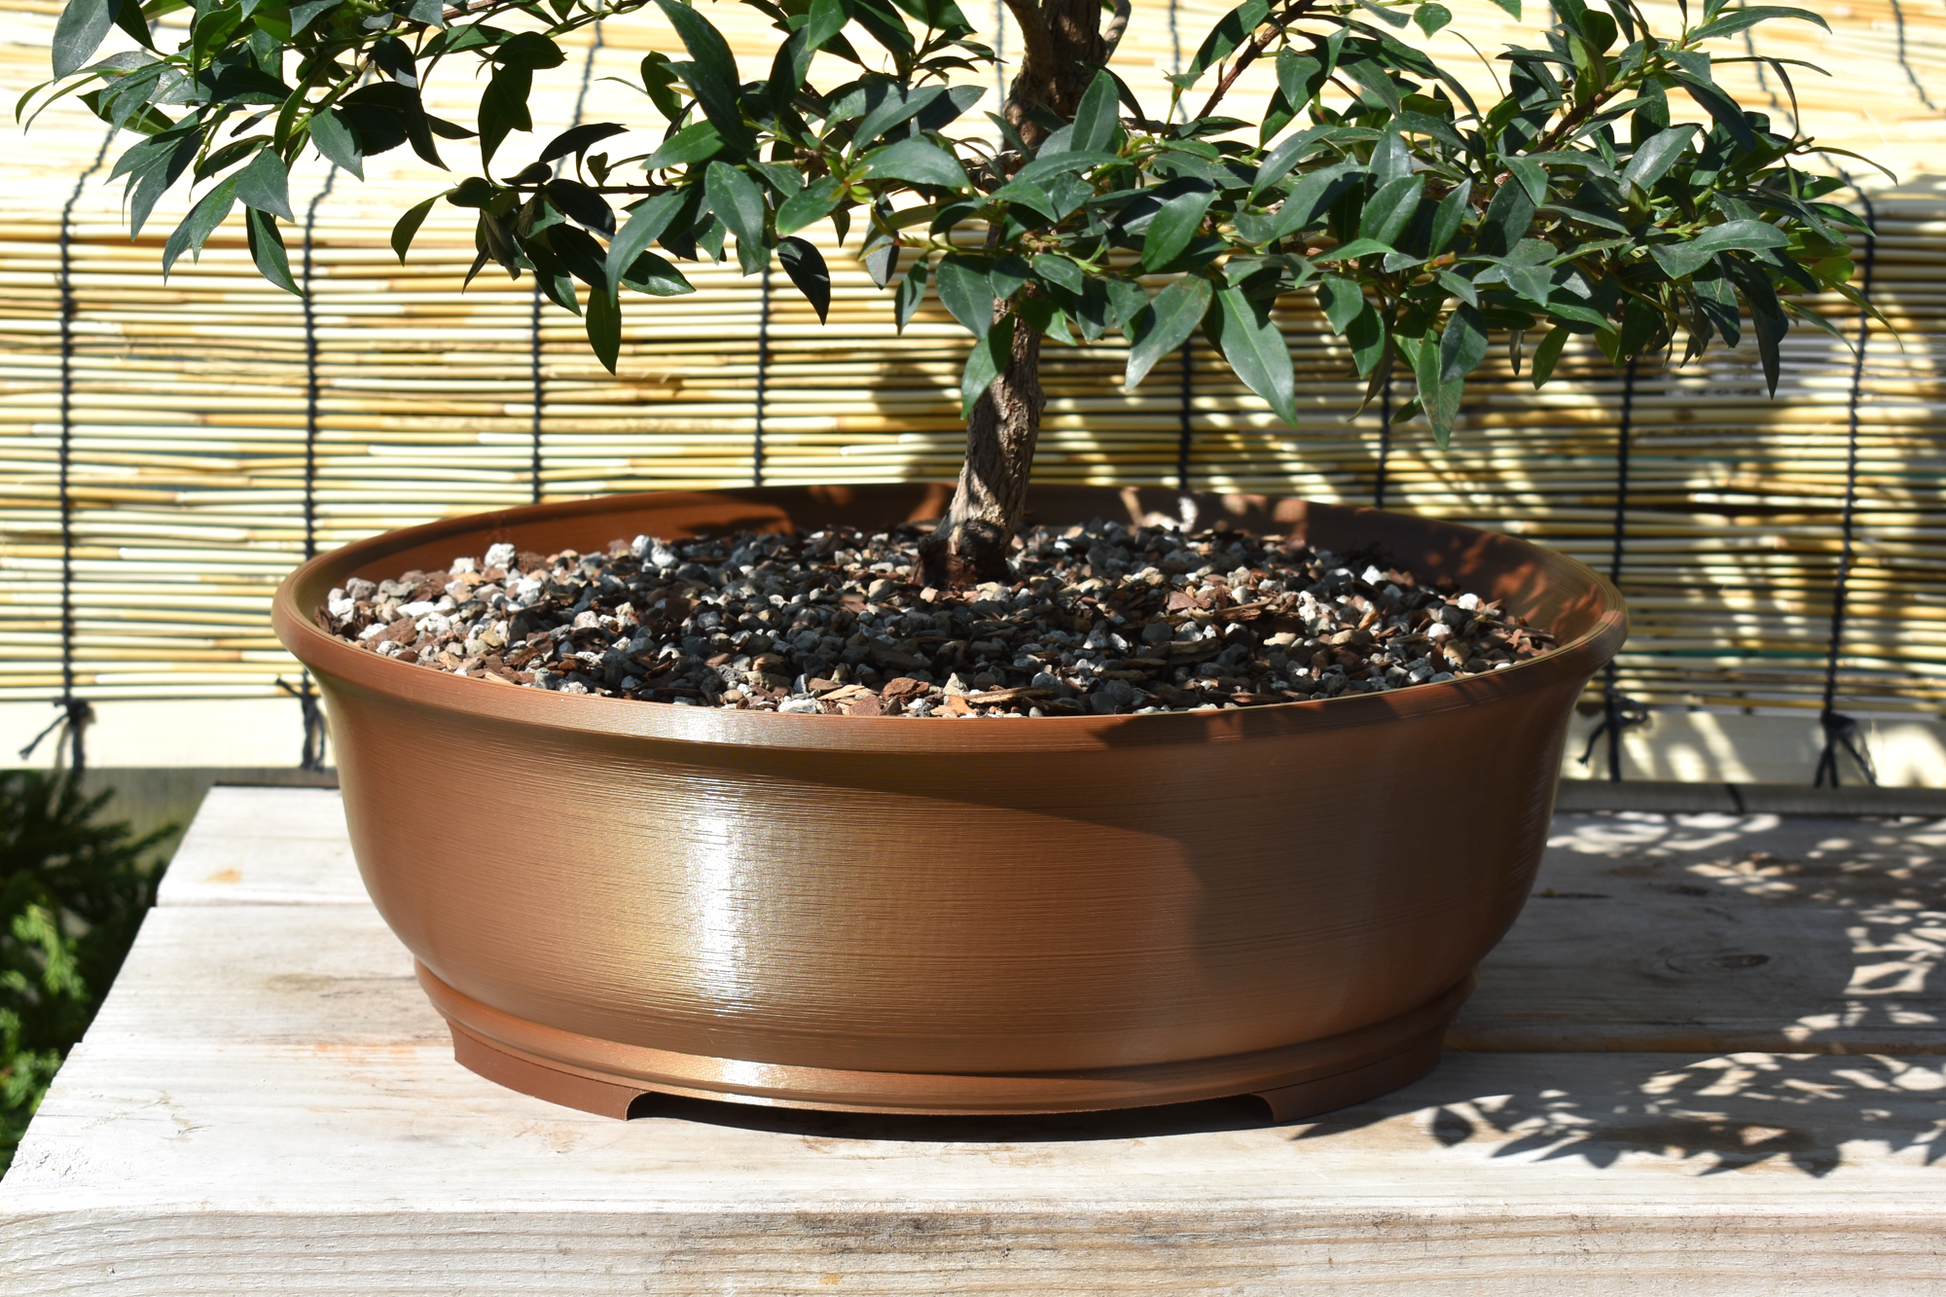 Our largest bonsai planter! A GLU3D Prints re-design of the classic oval bonsai planter available in 30+ modern color options, including metallic. The extra deep profile is perfect for fast water movers, larger trees, tropicals, bonsai forests, or even succulent and cactus arrangements. Dimensions - 15" long x 12.5" wide x 5" deep.